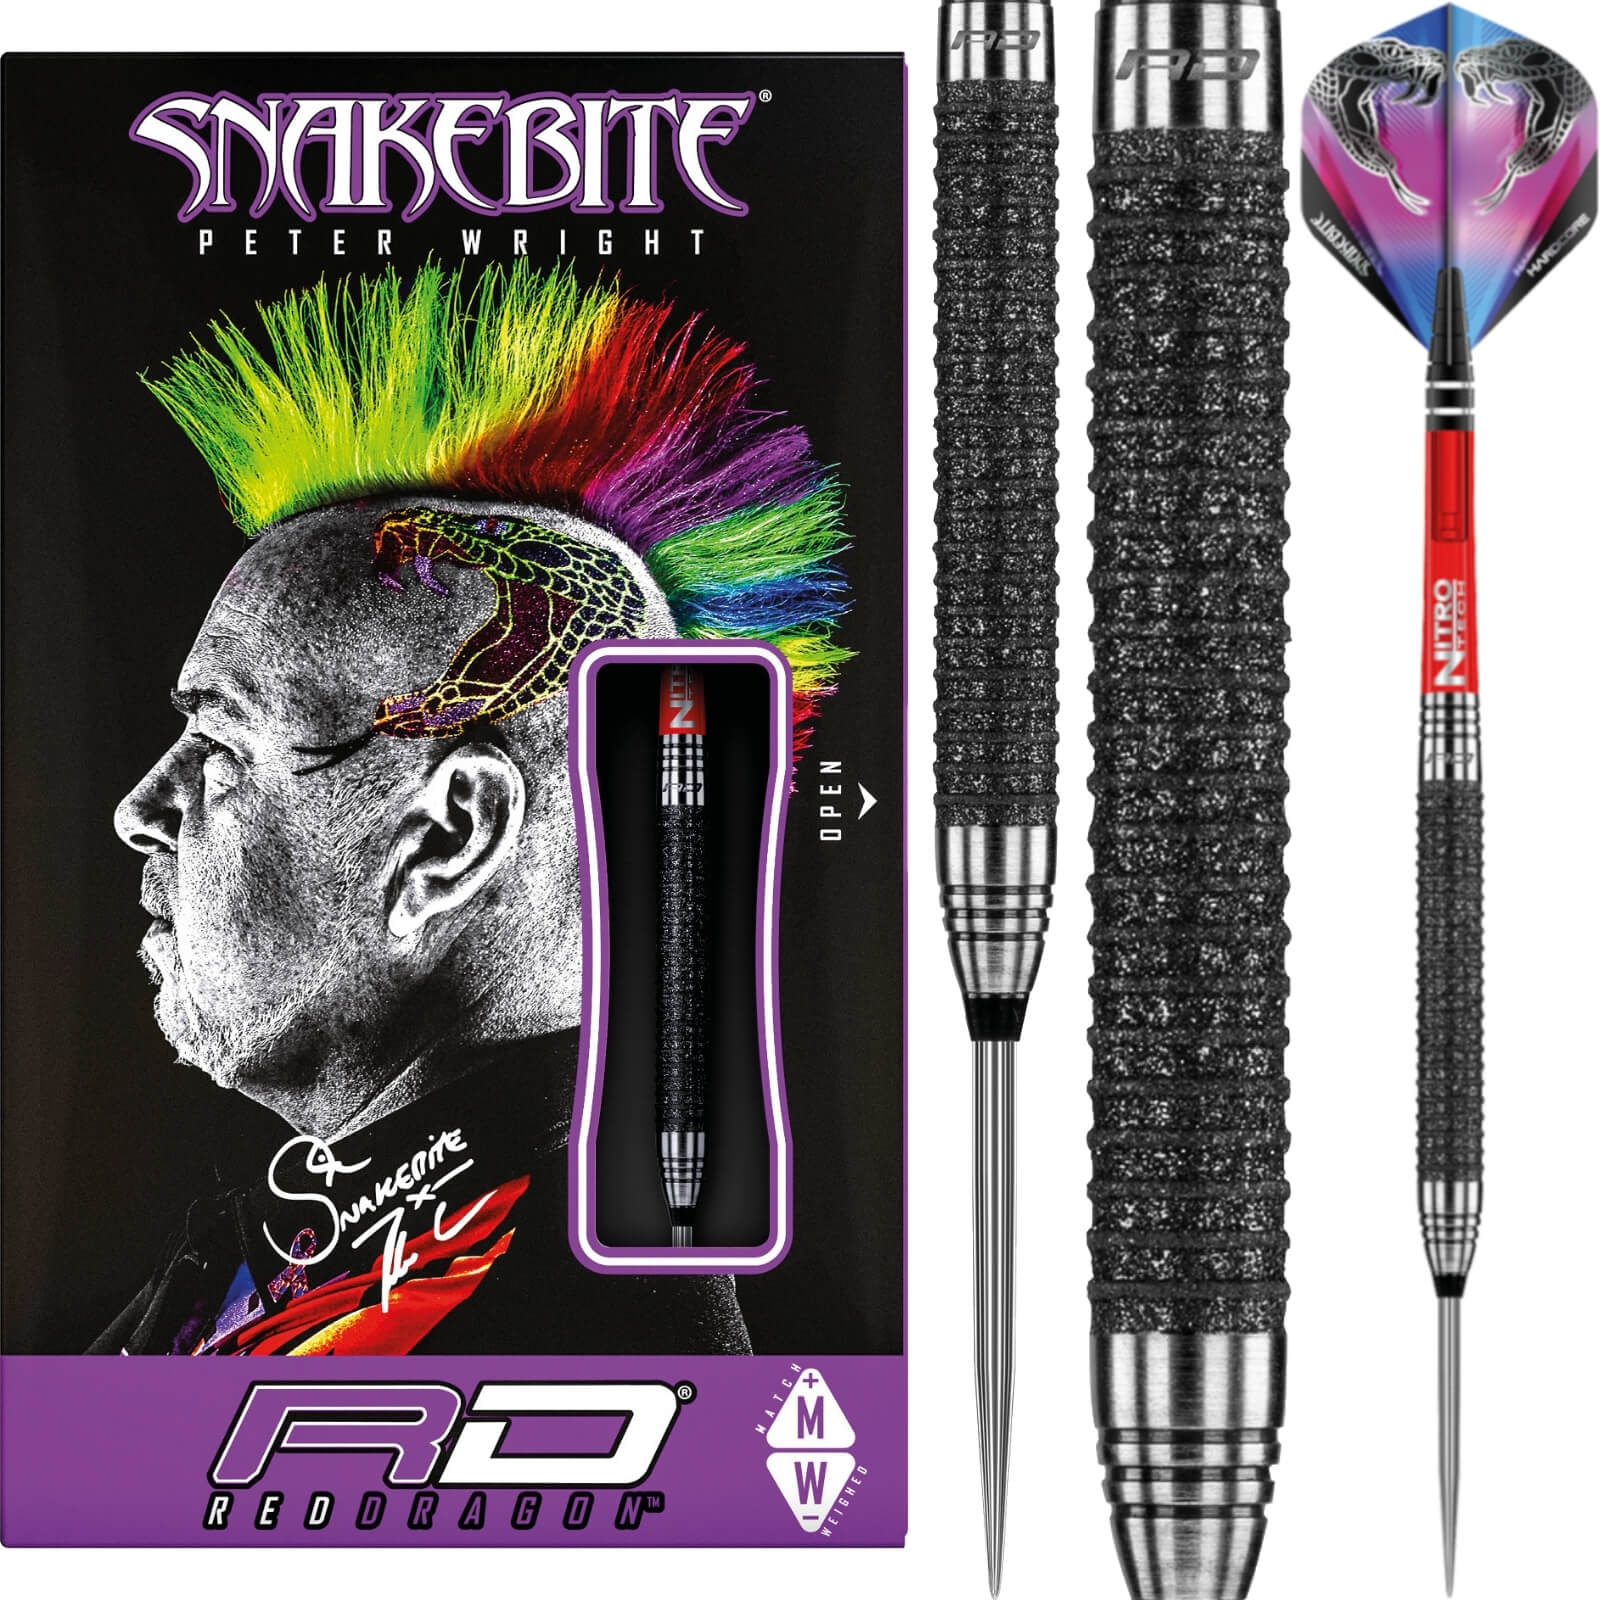 Darts - Red Dragon - Peter Snakebite Wright Melbourne Masters Edition Darts - Steel Tip - 90% Tungsten - 22g 